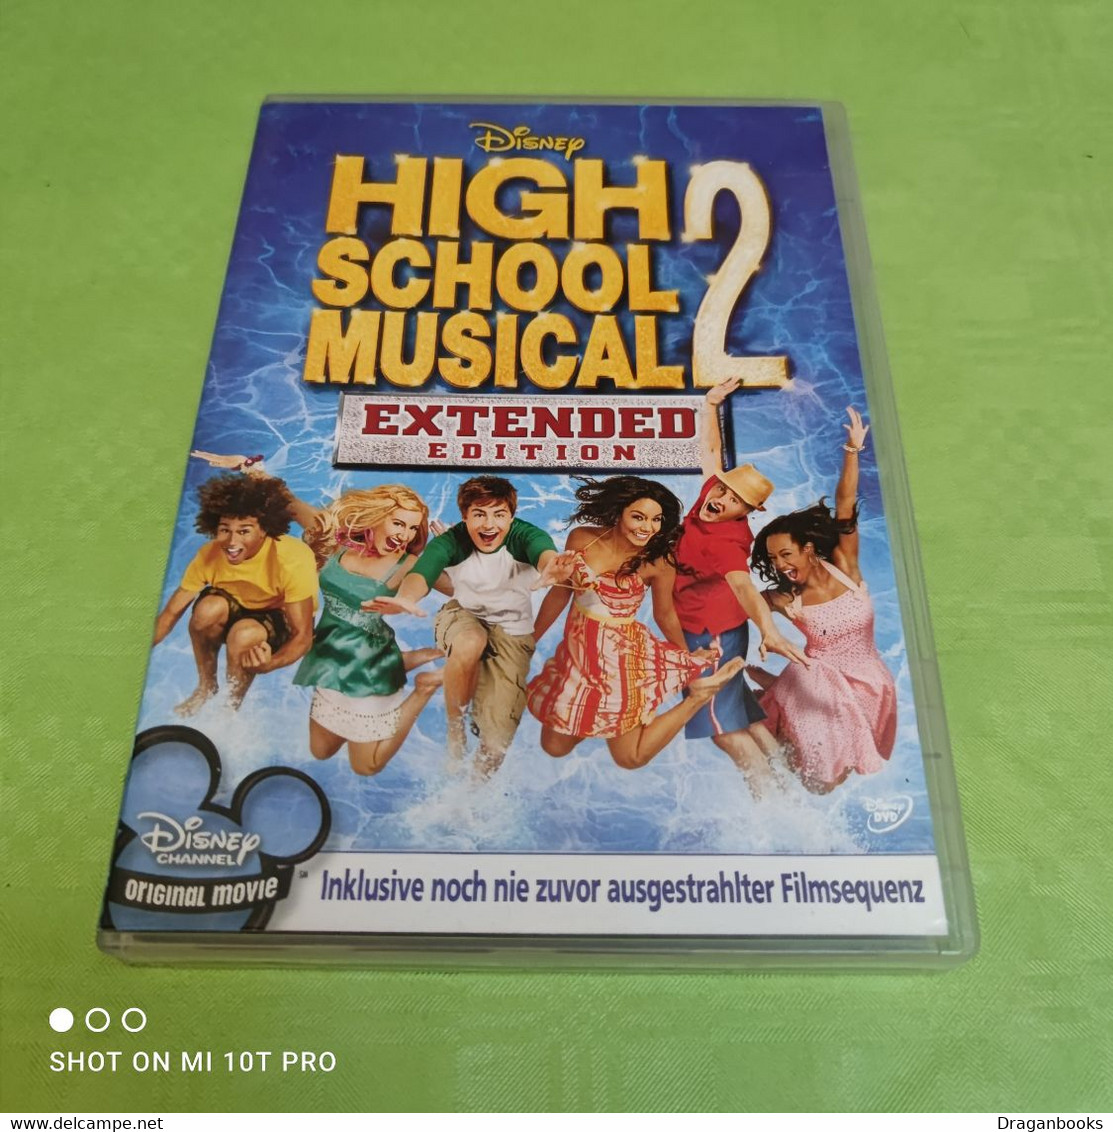 High School Musical 2 - Extended Edition - Comedias Musicales